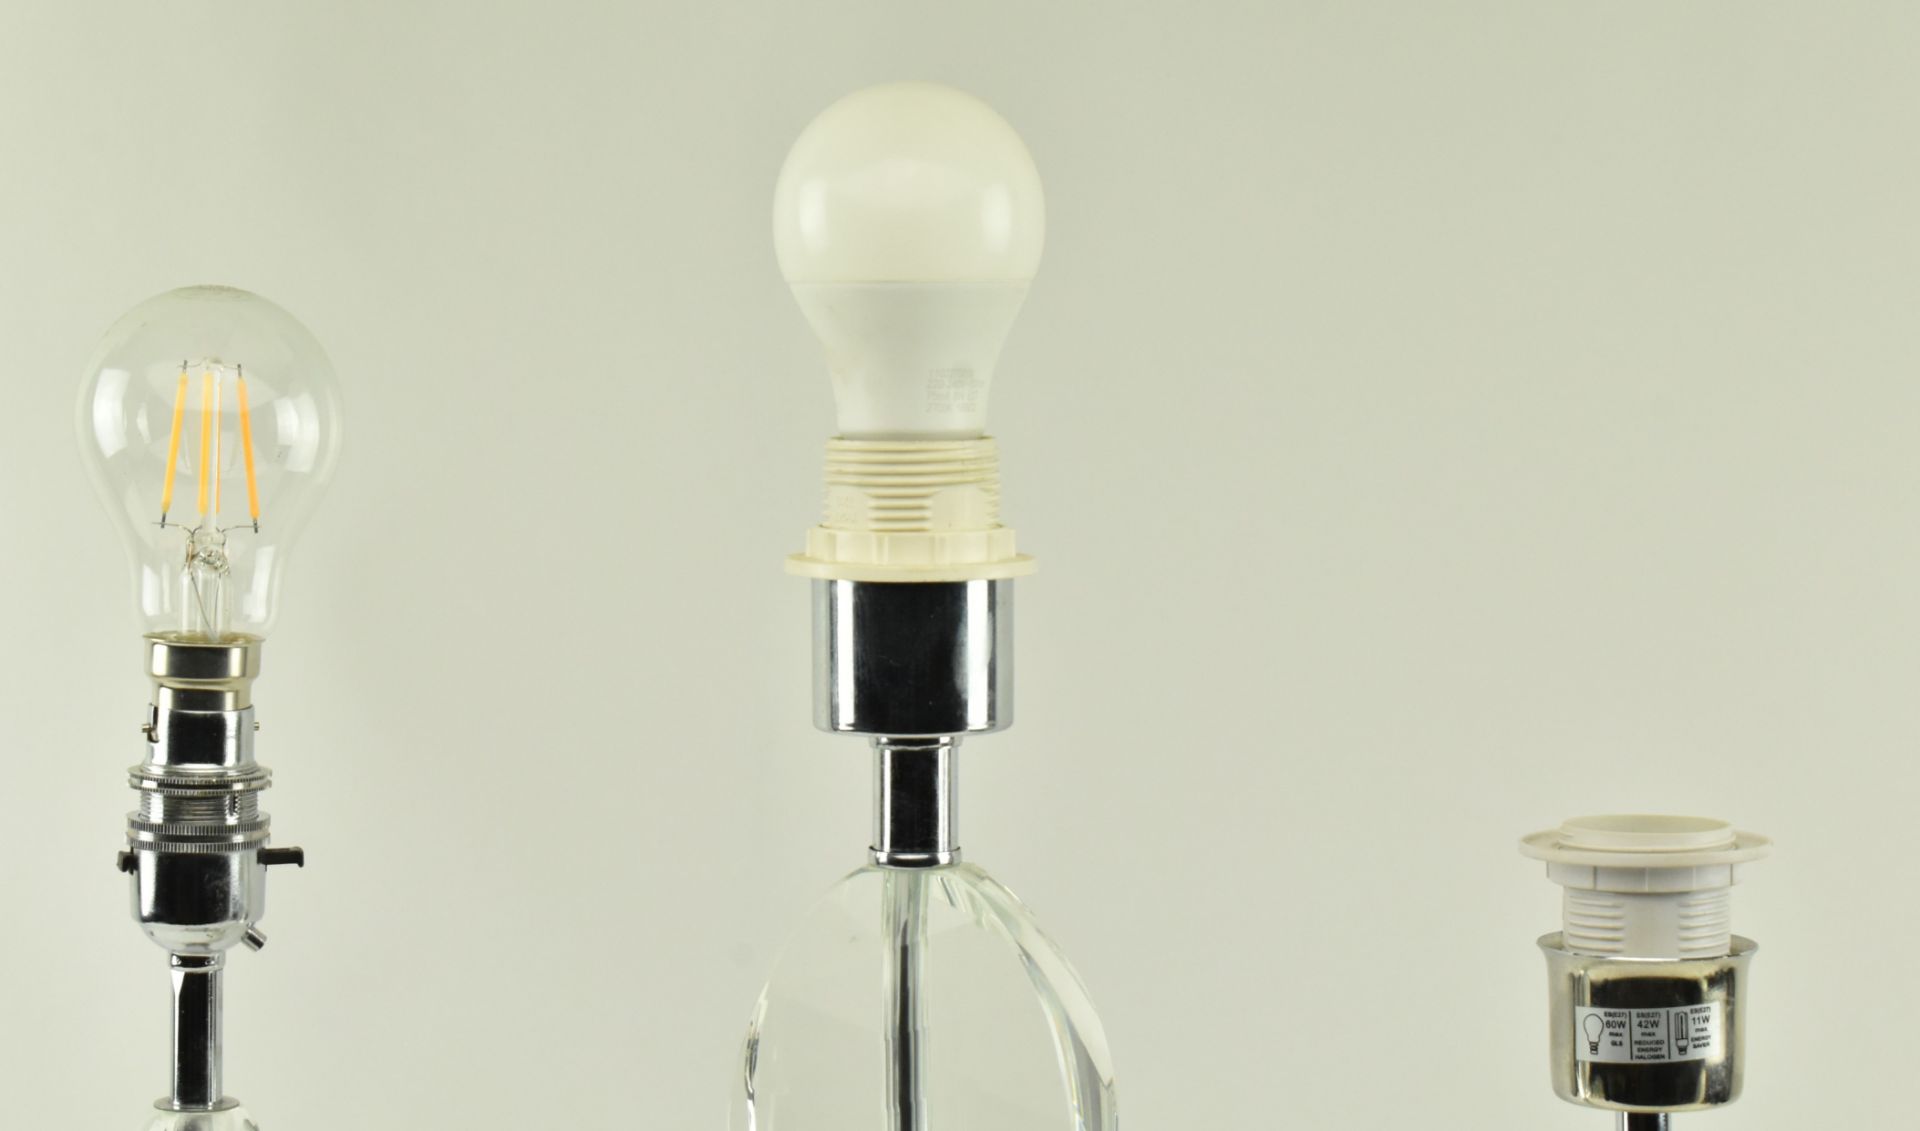 HARLEQUIN SET OF THREE CONTEMPORARY CLEAR GLASS DESK LAMPS - Image 3 of 6